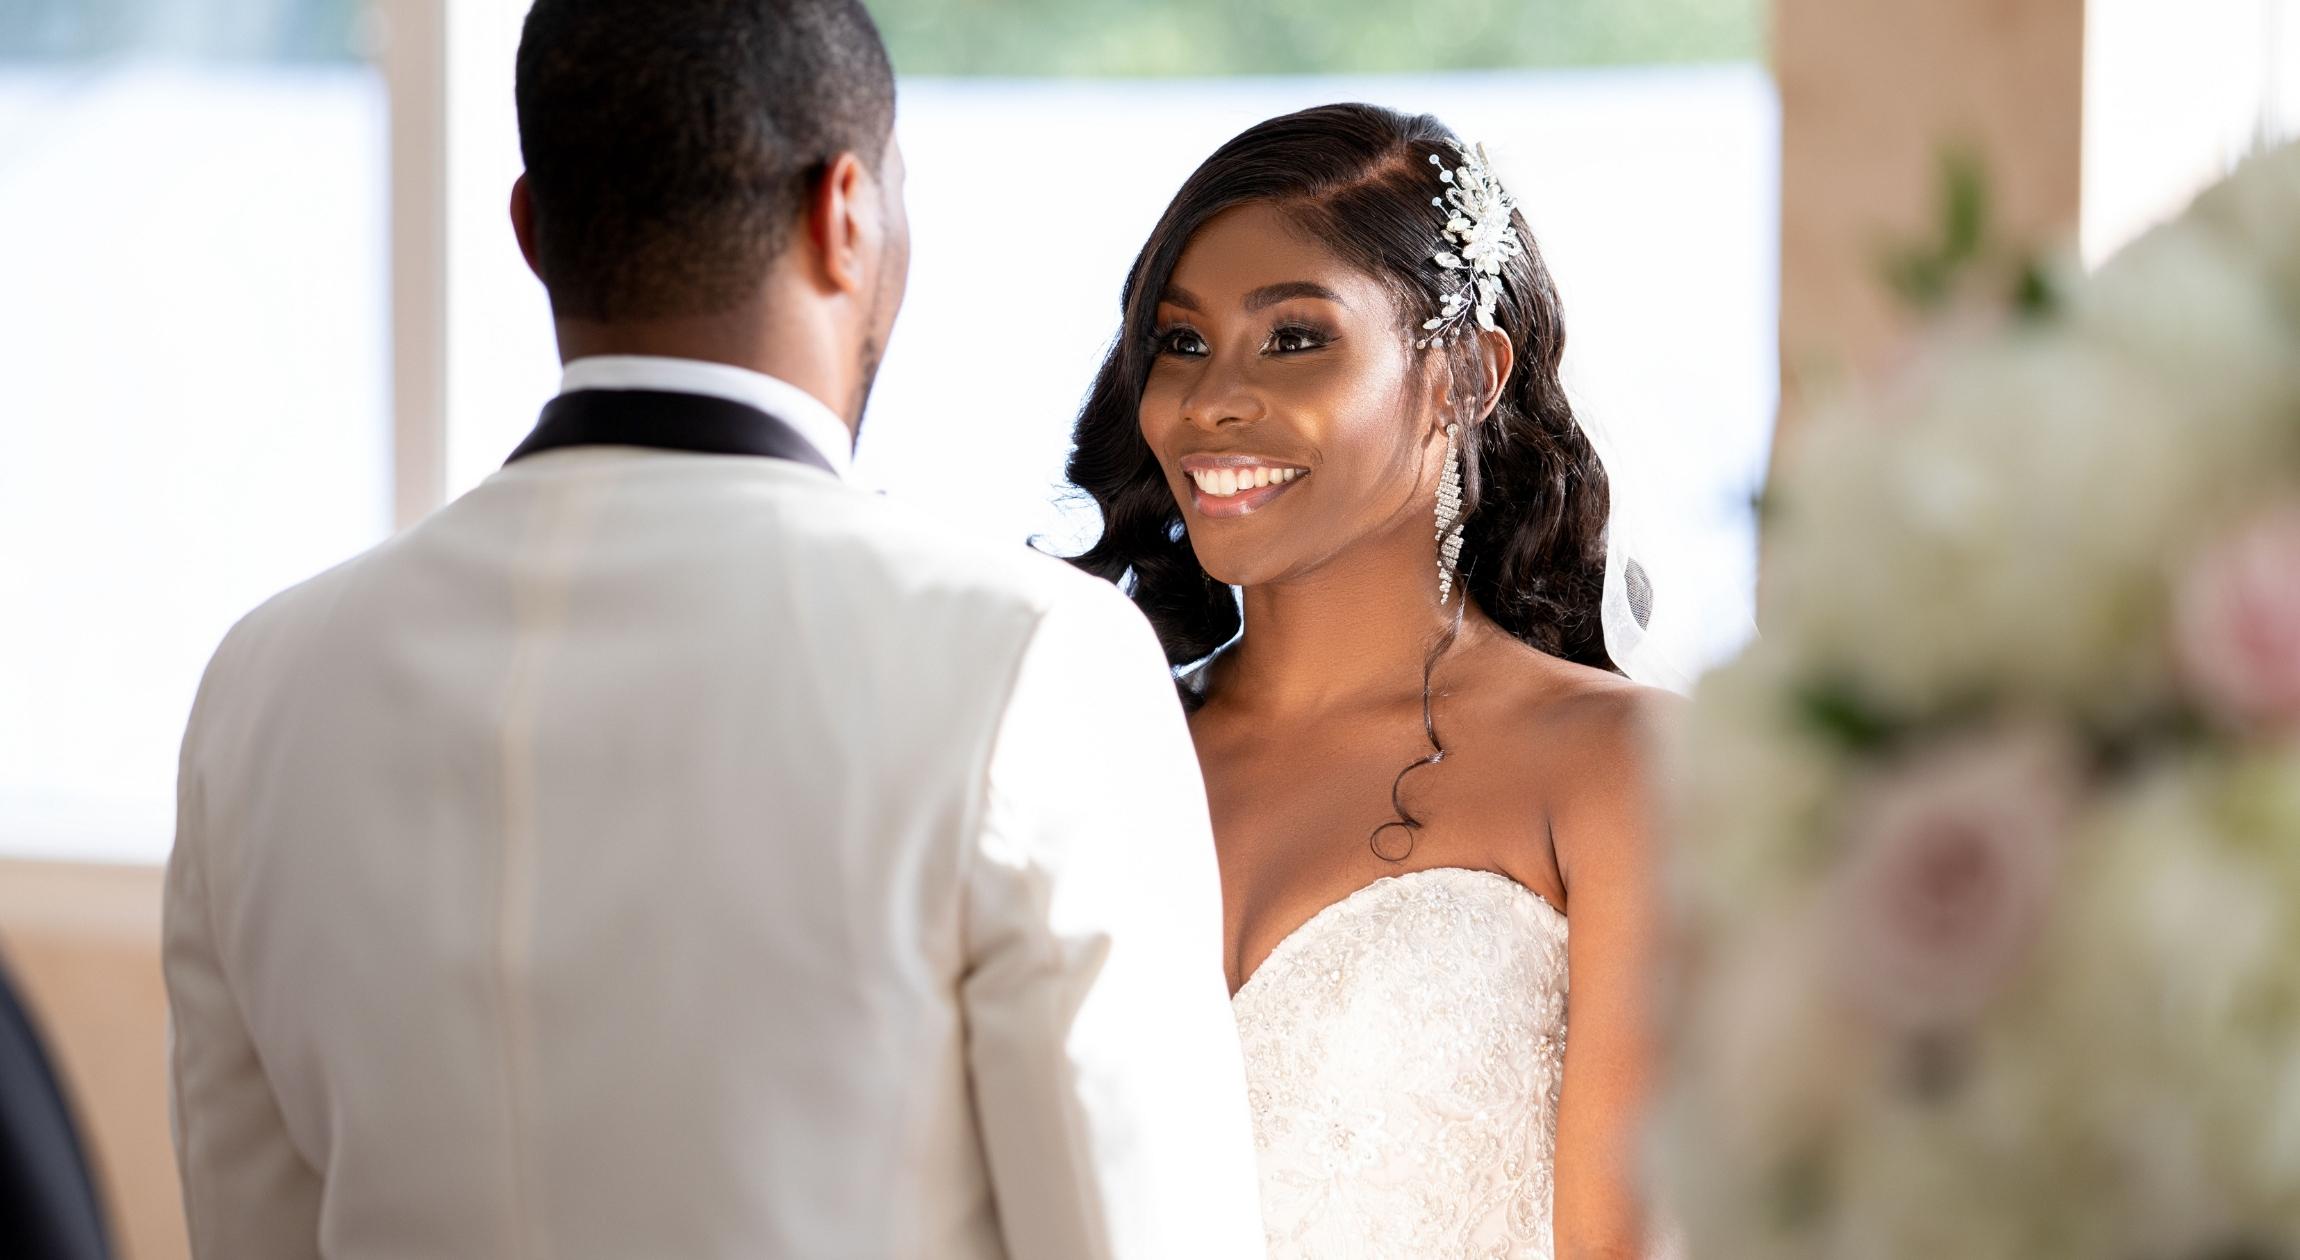 An African American bride stares and smiles at her groom